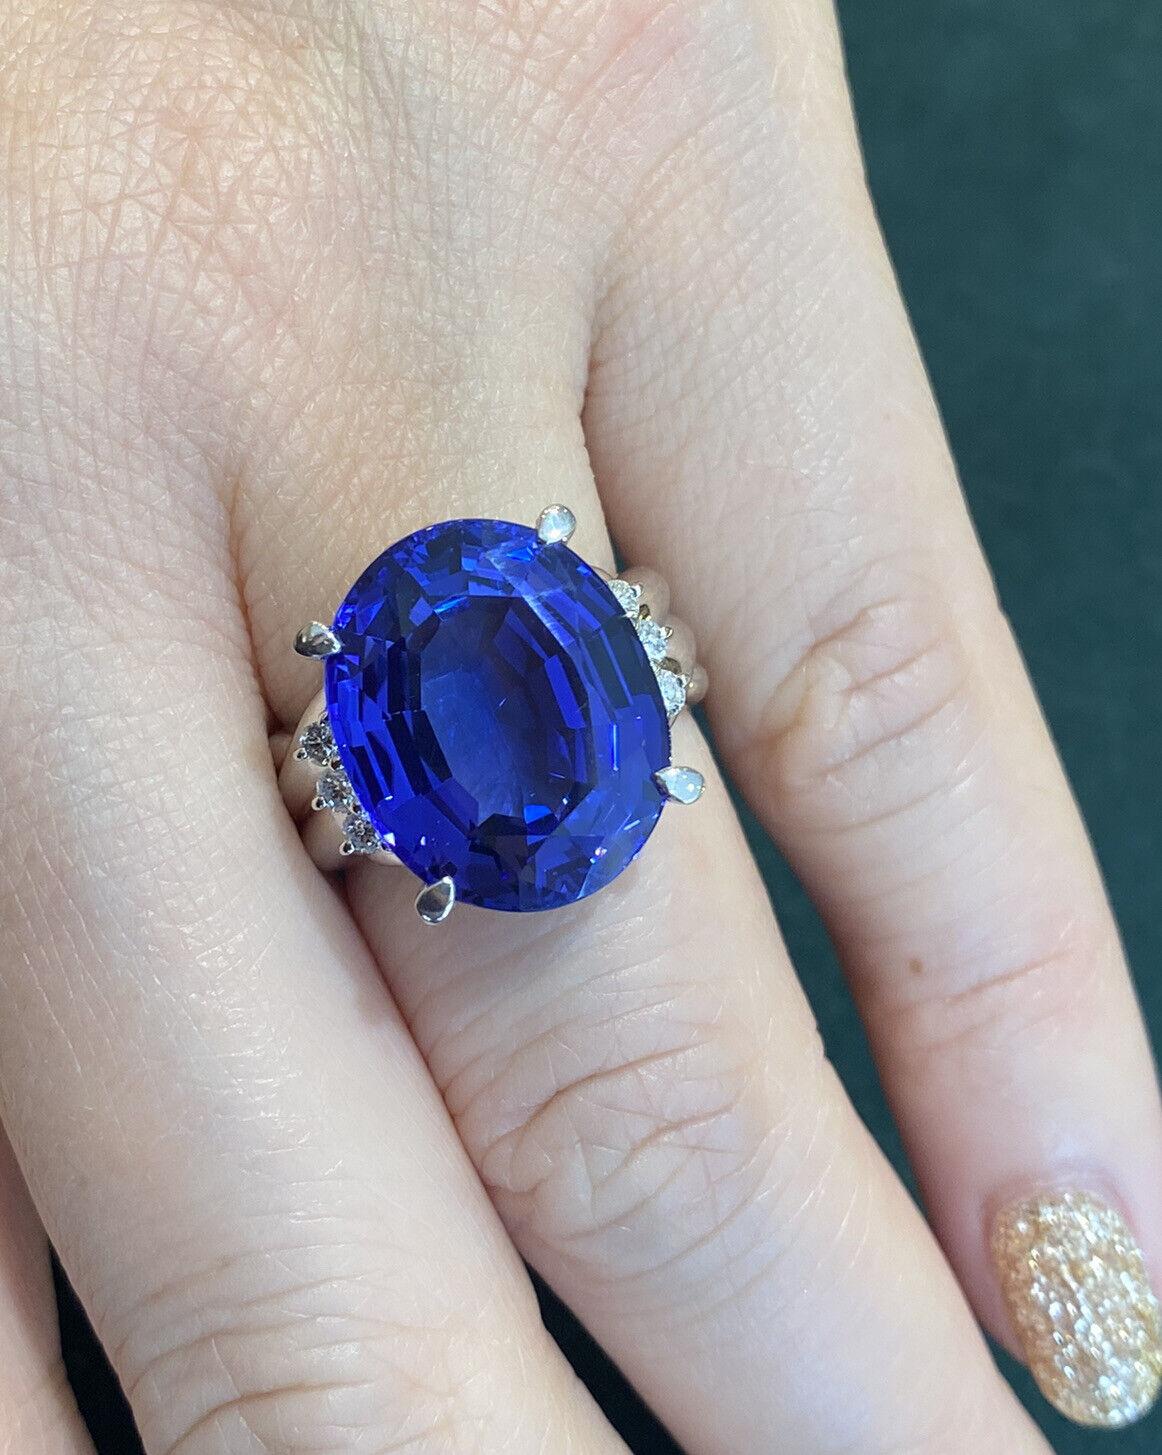 GIA Certified Oval Tanzanite and Diamond Ring in Platinum

Oval Tanzanite & Diamond Ring features an Oval shaped Tanzanite in the center with Six Round Brilliant cut Diamonds on the sides set in Platinum.

Tanzanite weight is 12.80 carats and is GIA